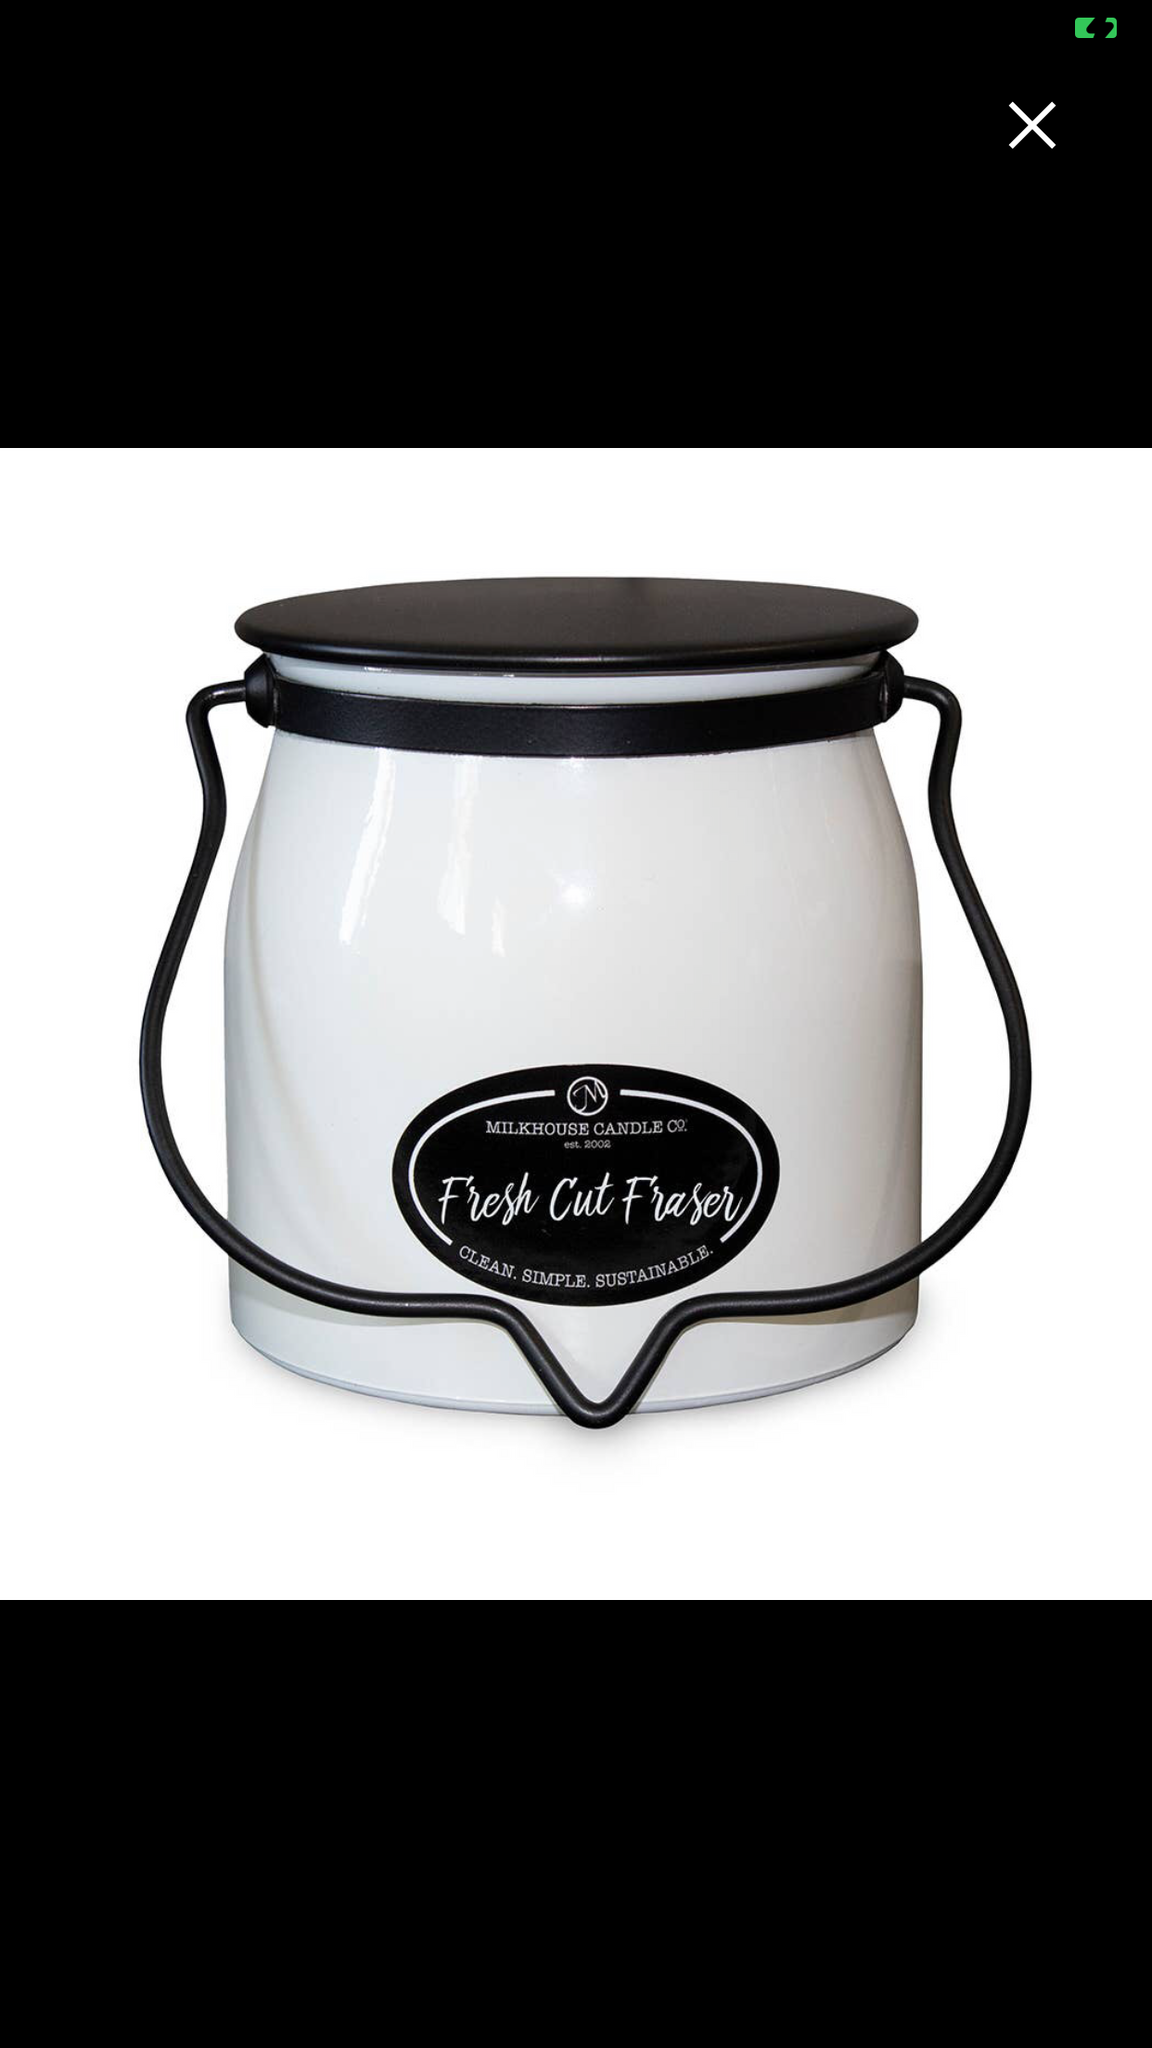 ALL 16oz Milkhouse Candles